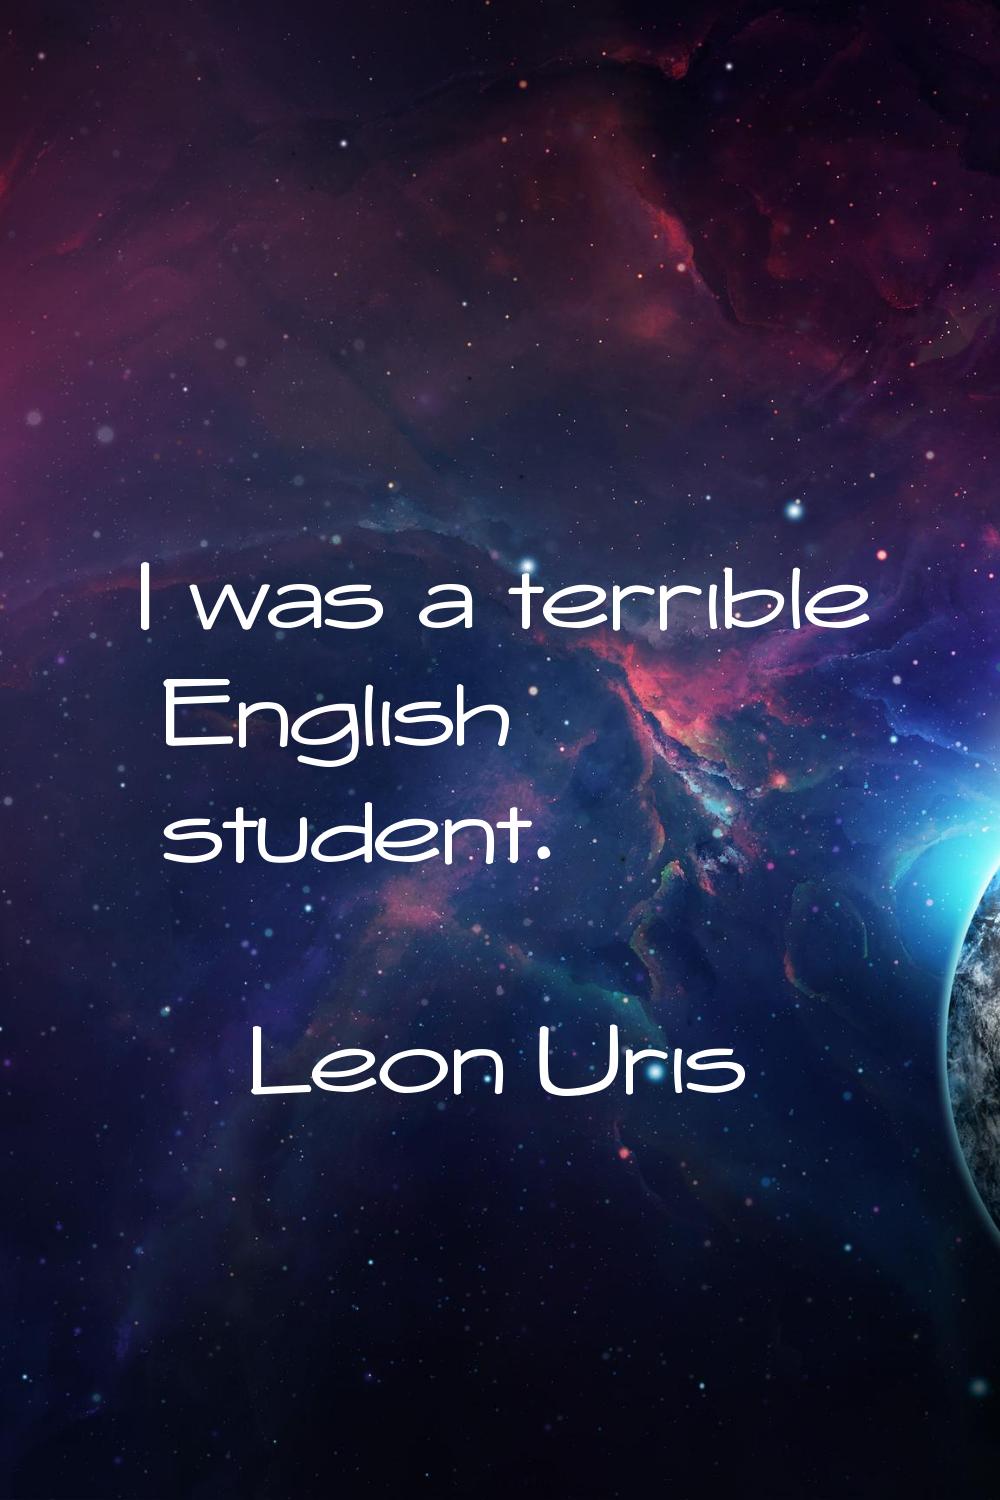 I was a terrible English student.